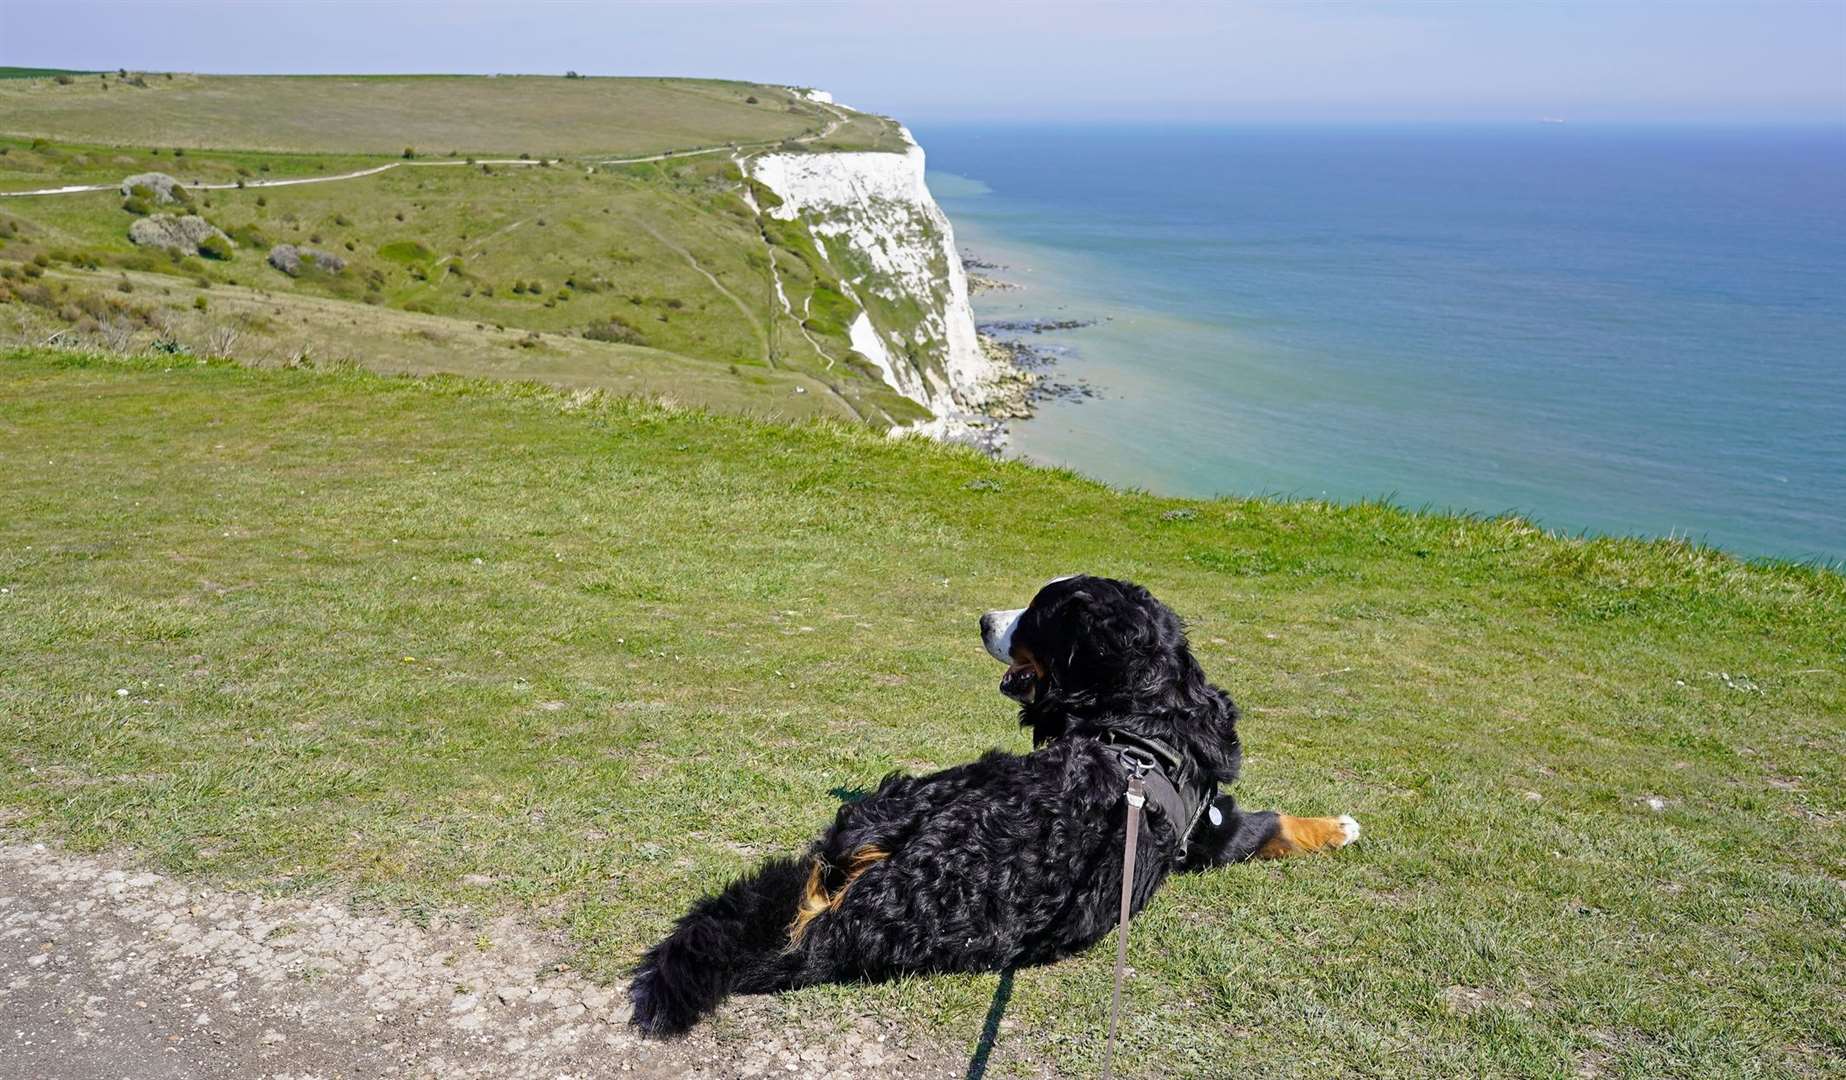 The walks take place in several different coastal and countryside locations. Picture: iStock